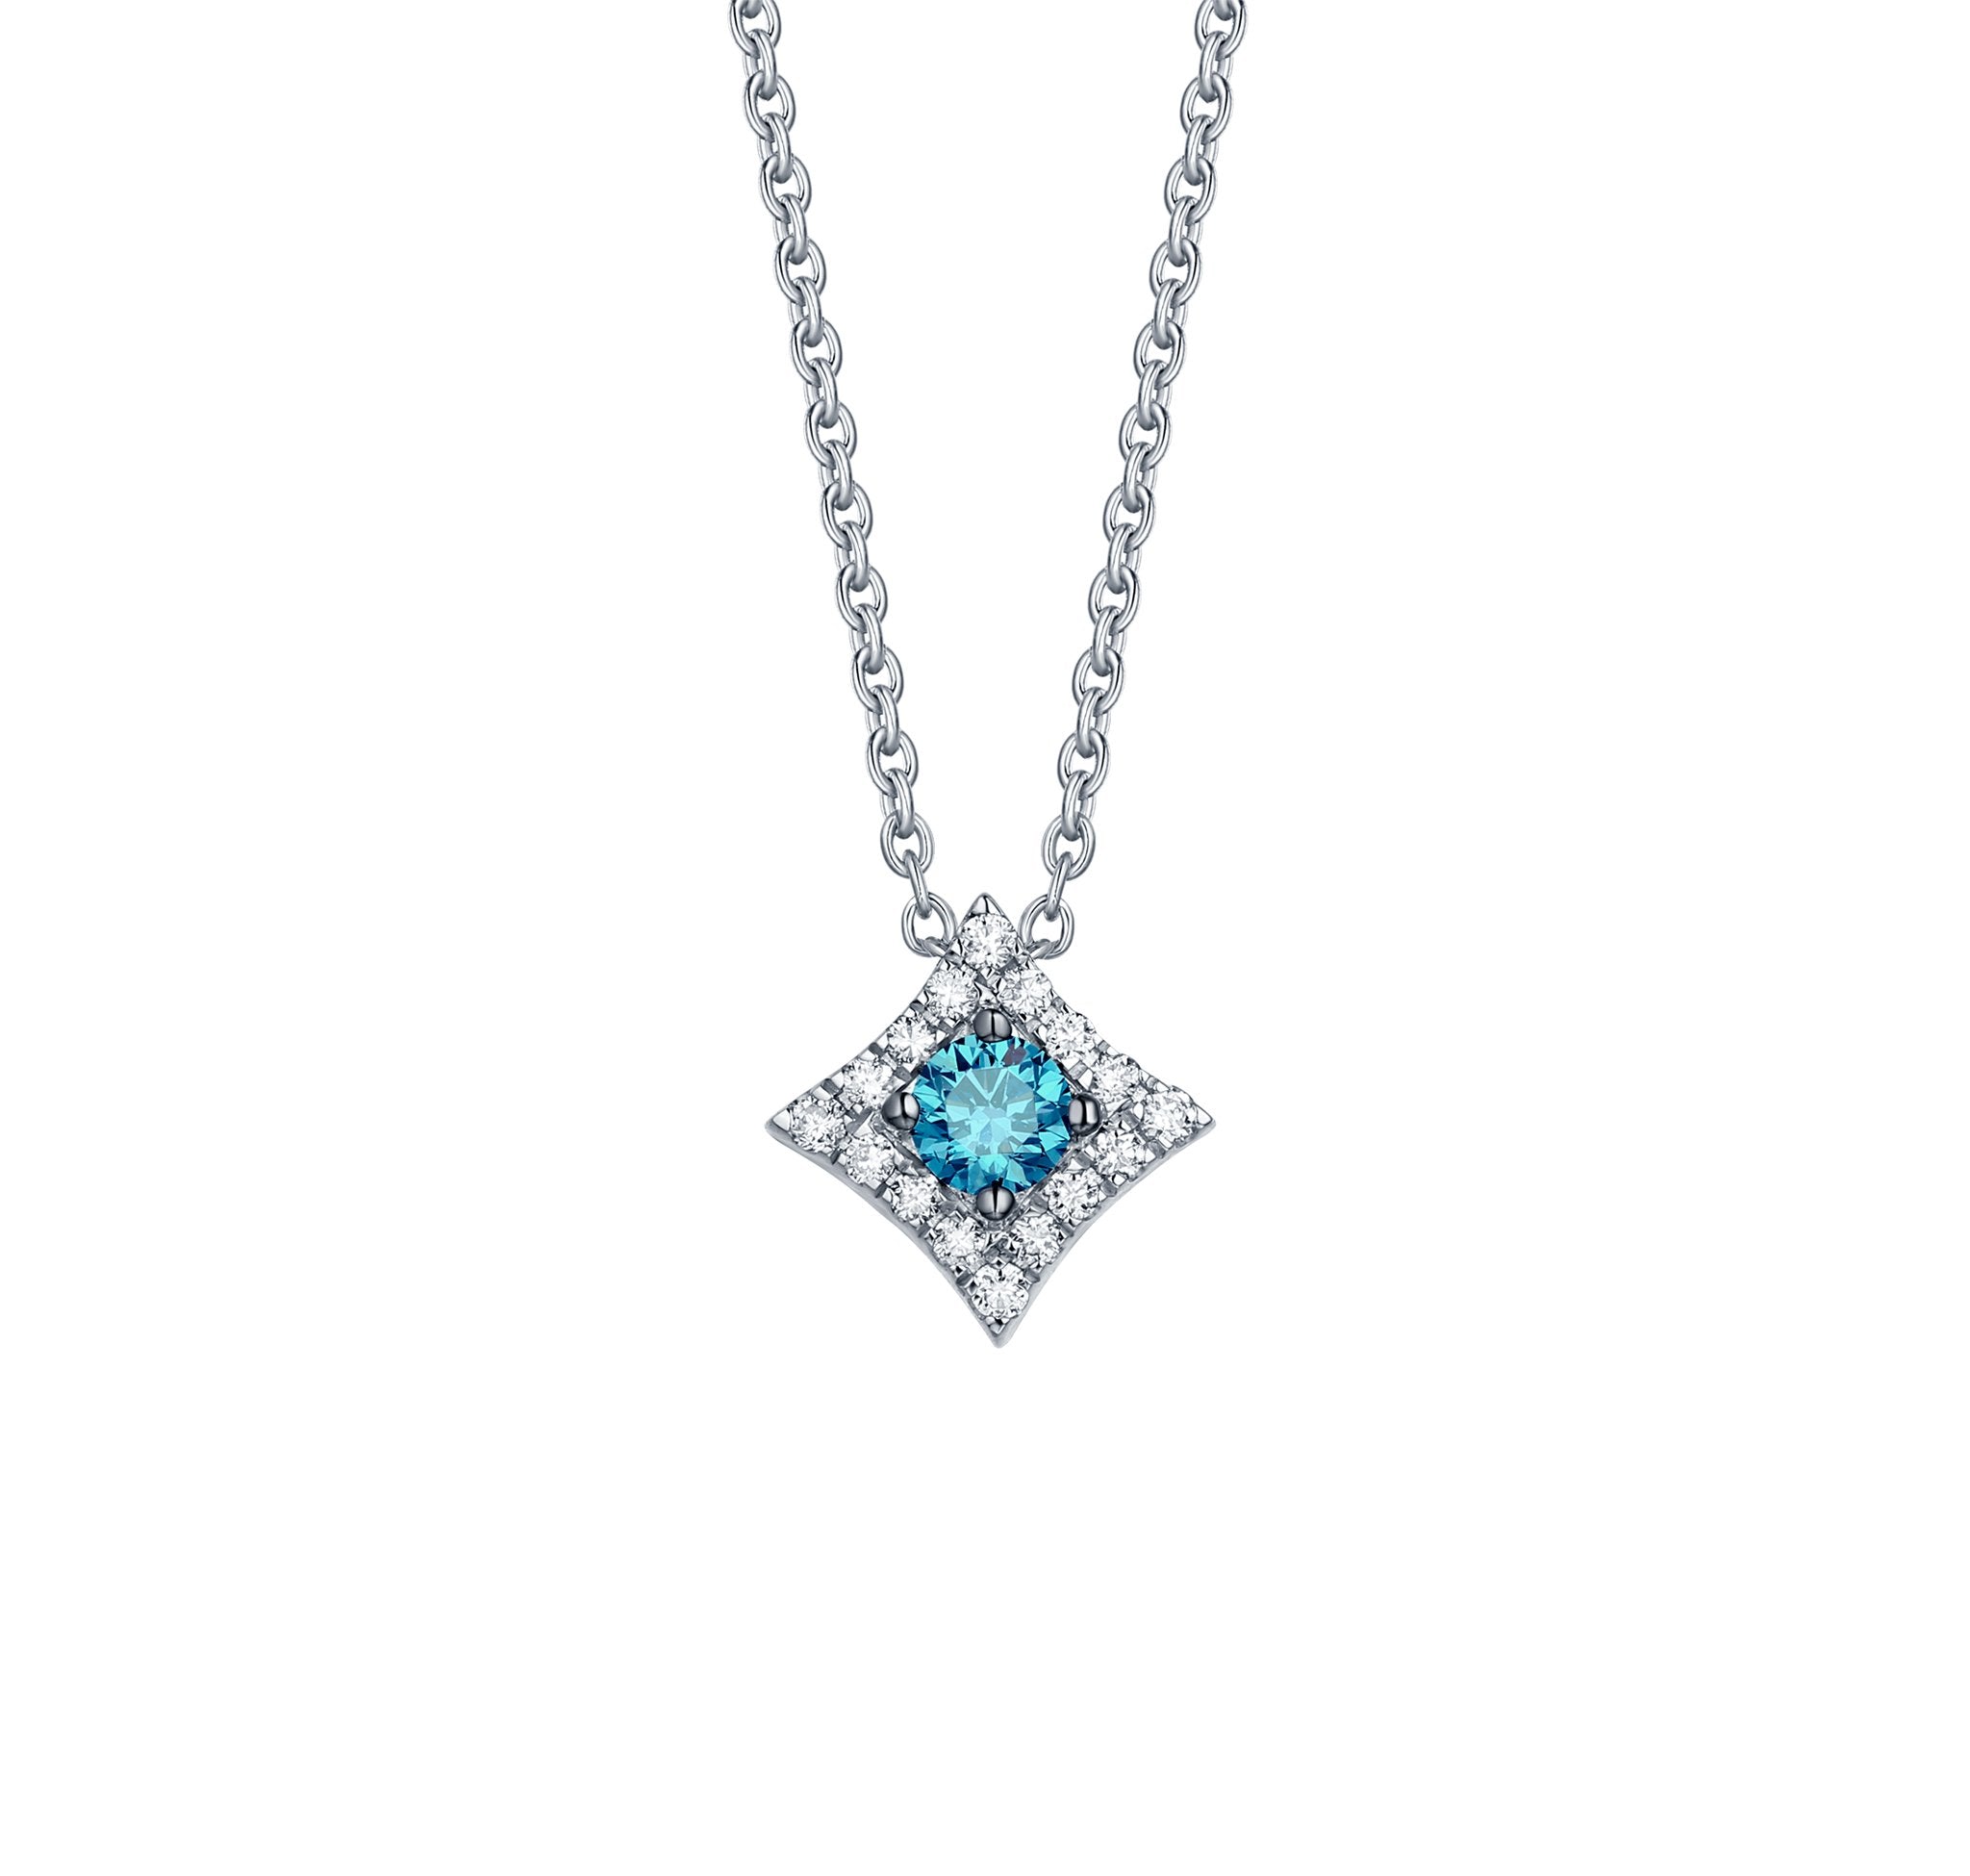 Smiling Rocks Lab Grown Diamond Blush Blue Sparkle Halo design necklace 0.25ctw in Sterling Silver 